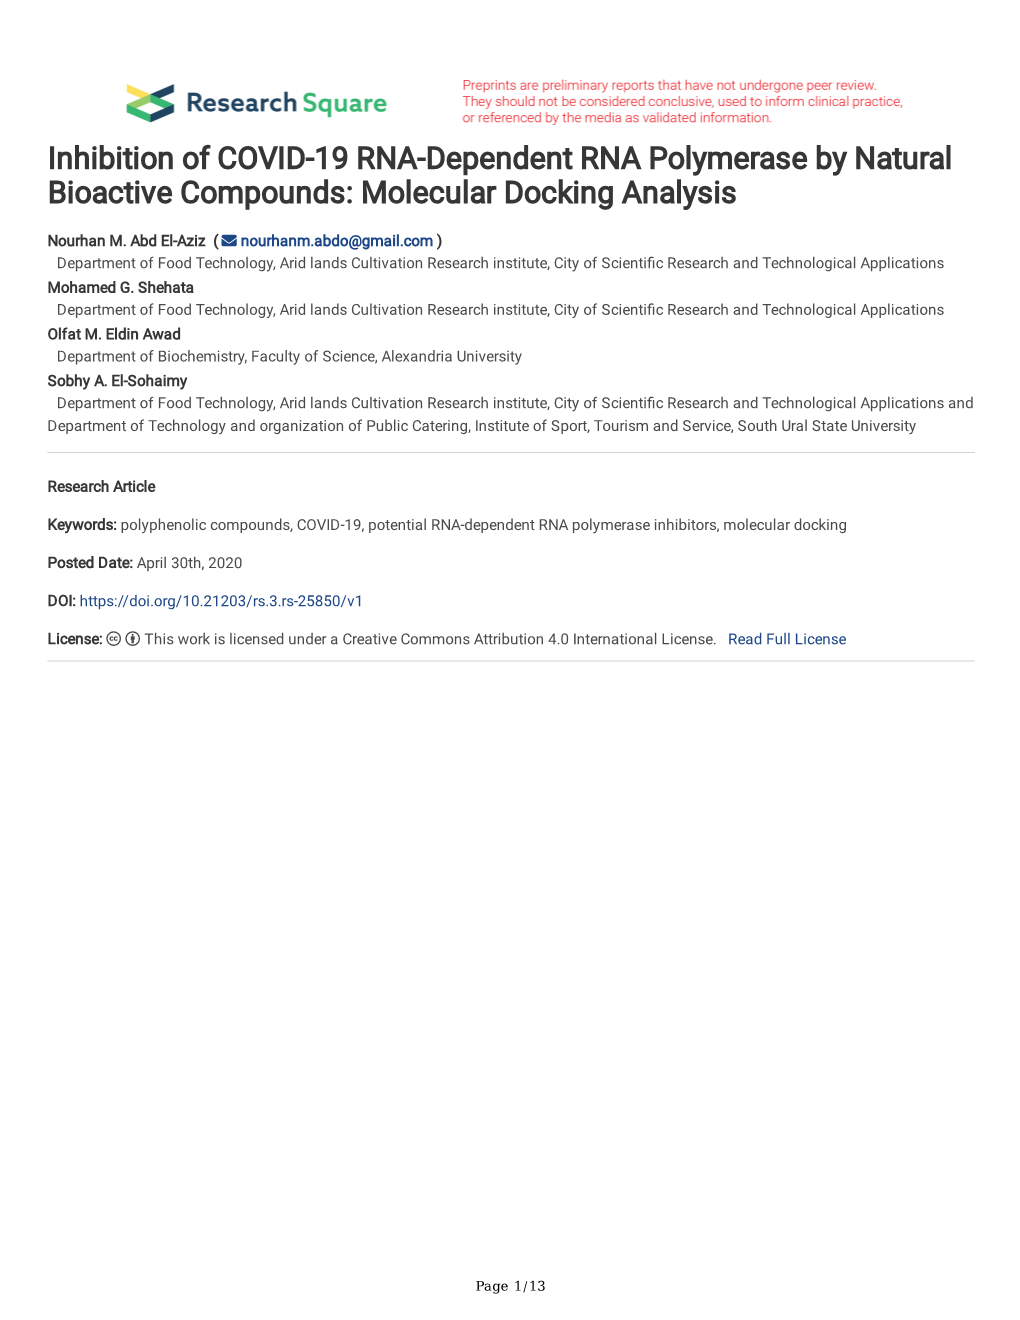 Inhibition of COVID-19 RNA-Dependent RNA Polymerase by Natural Bioactive Compounds: Molecular Docking Analysis